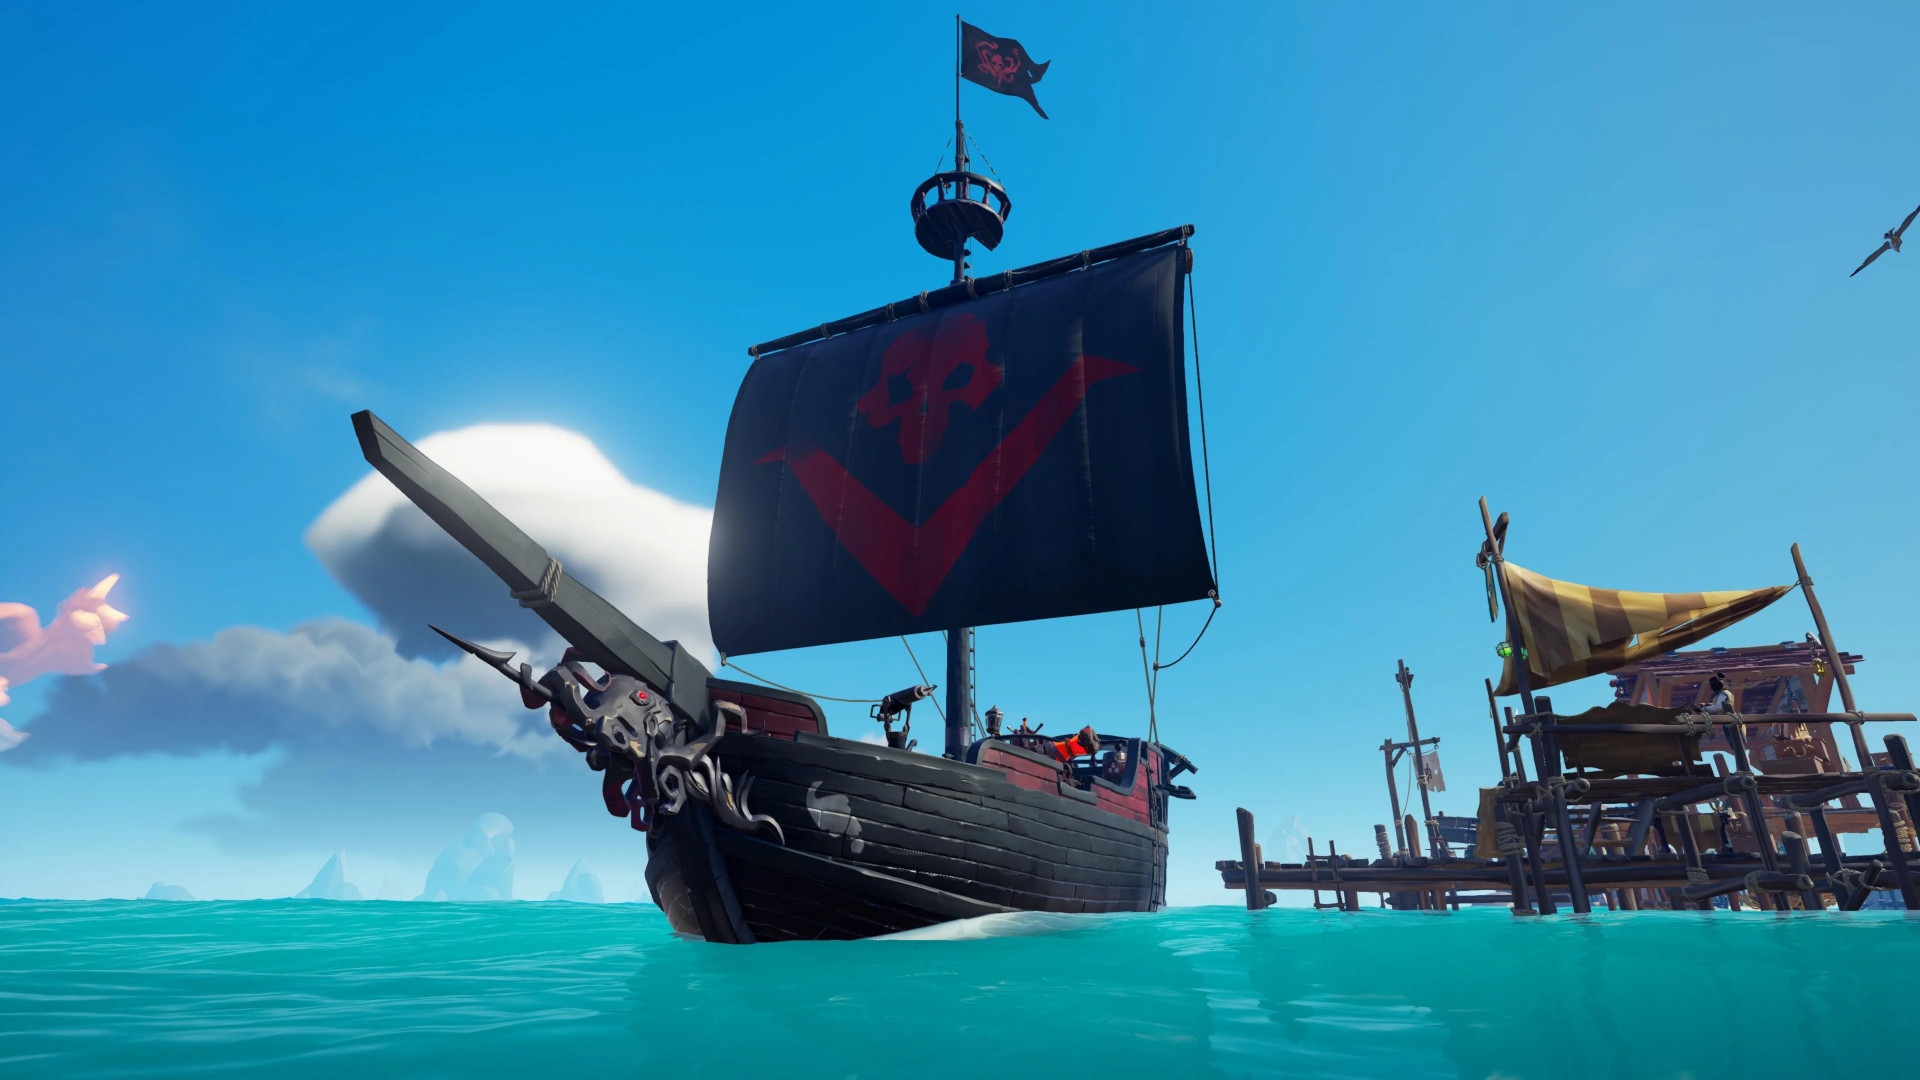 Sea of Thieves - Sails of the Bonny Belle DLC XBOX One / Windows 10 CD Key $89.27